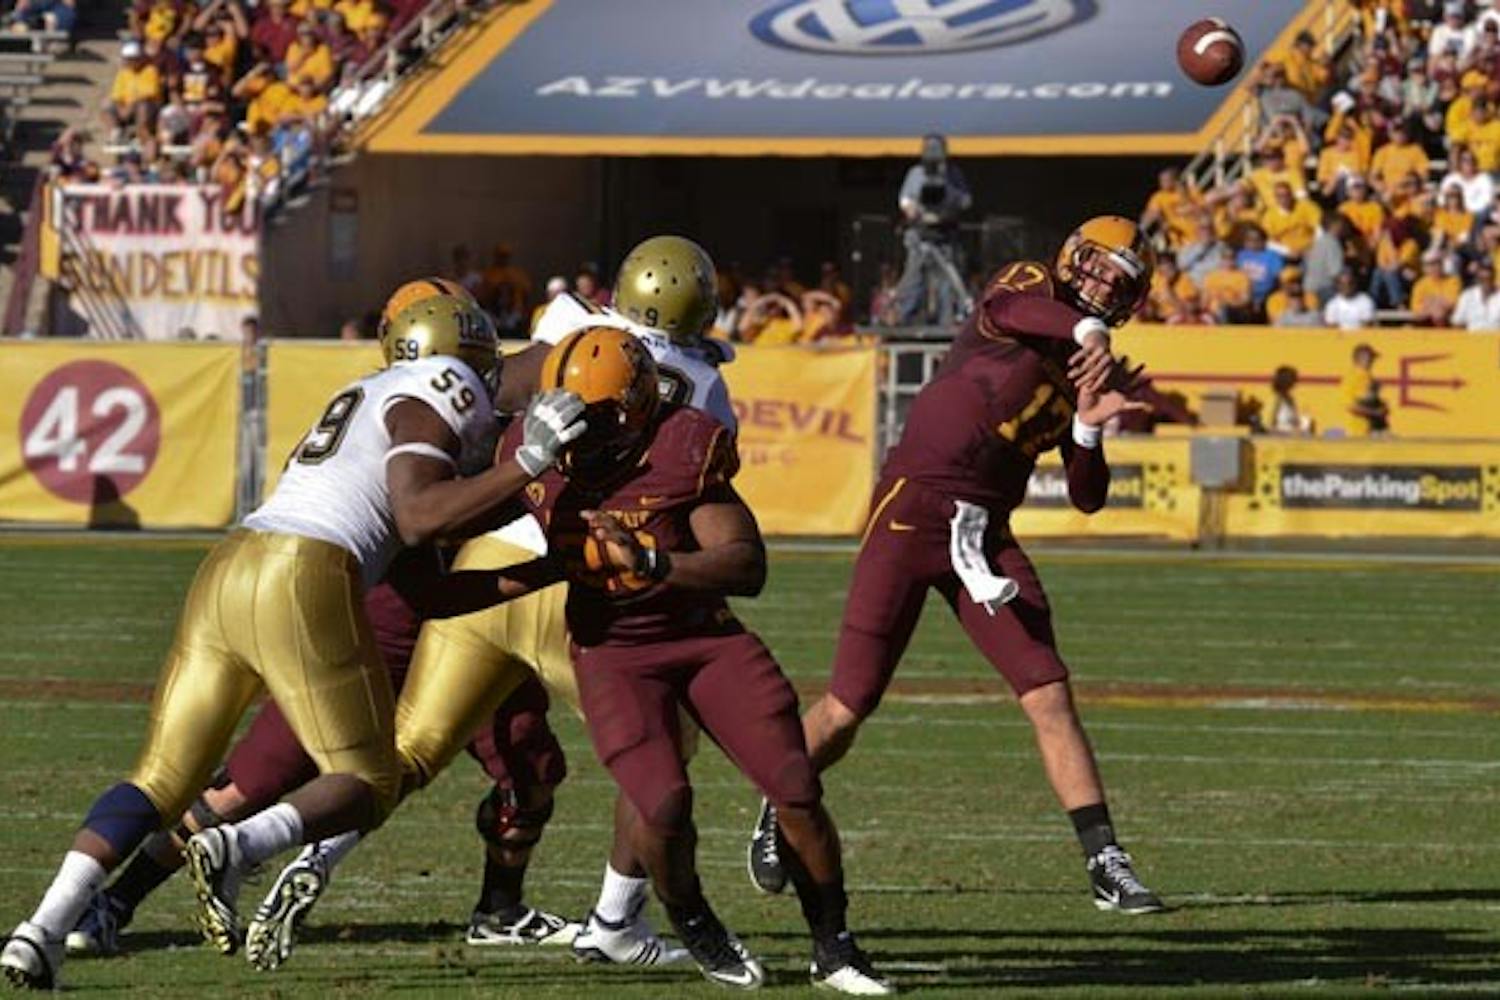 BROCK SOLID: Sophomore quarterback Brock Osweiler fires a pass during Saturday's game against UCLA. In the 55-34 ASU win, Osweiler passed for 380 yards and four touchdowns while completing 27 of 36 passes in what was the best statistical performance by an ASU quarterback since Dennis Erickson took over as coach. (Photo by Aaron Lavinsky)